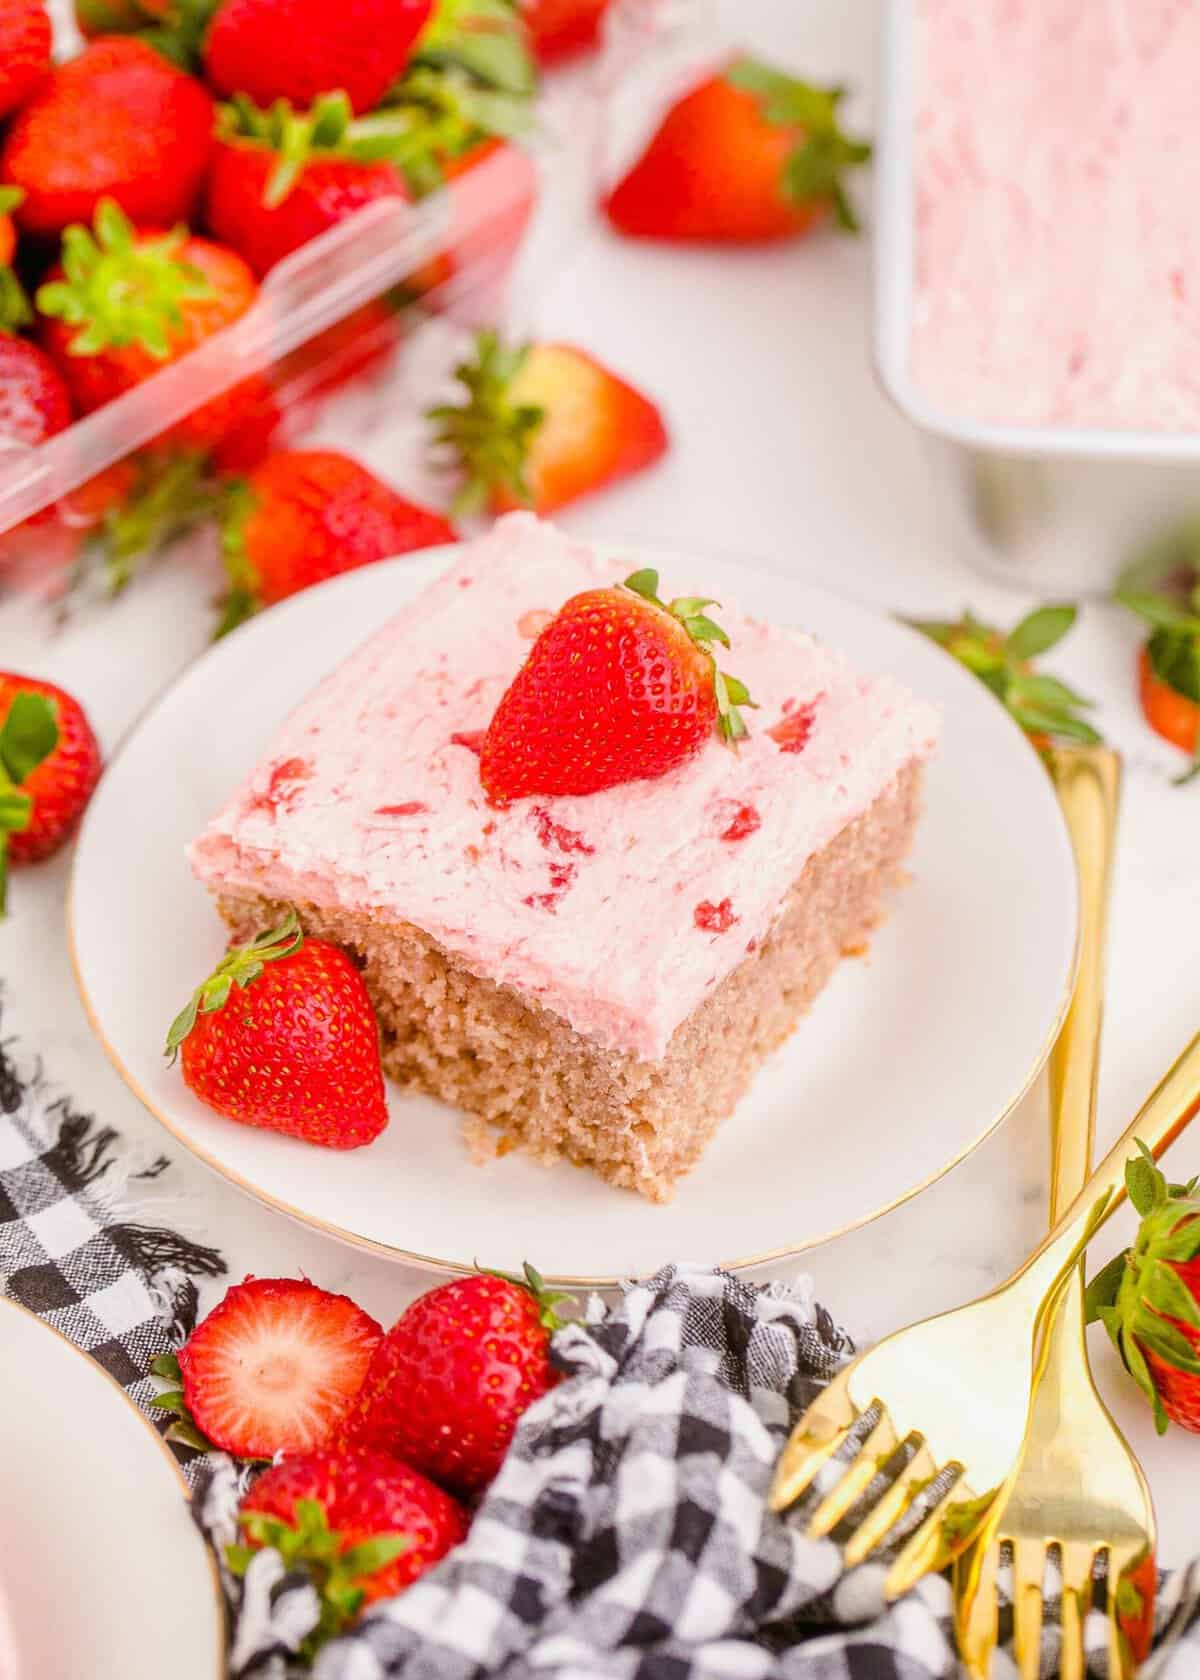 Strawberry sheet cake on plate, garnished with and surrounded by fresh strawberries